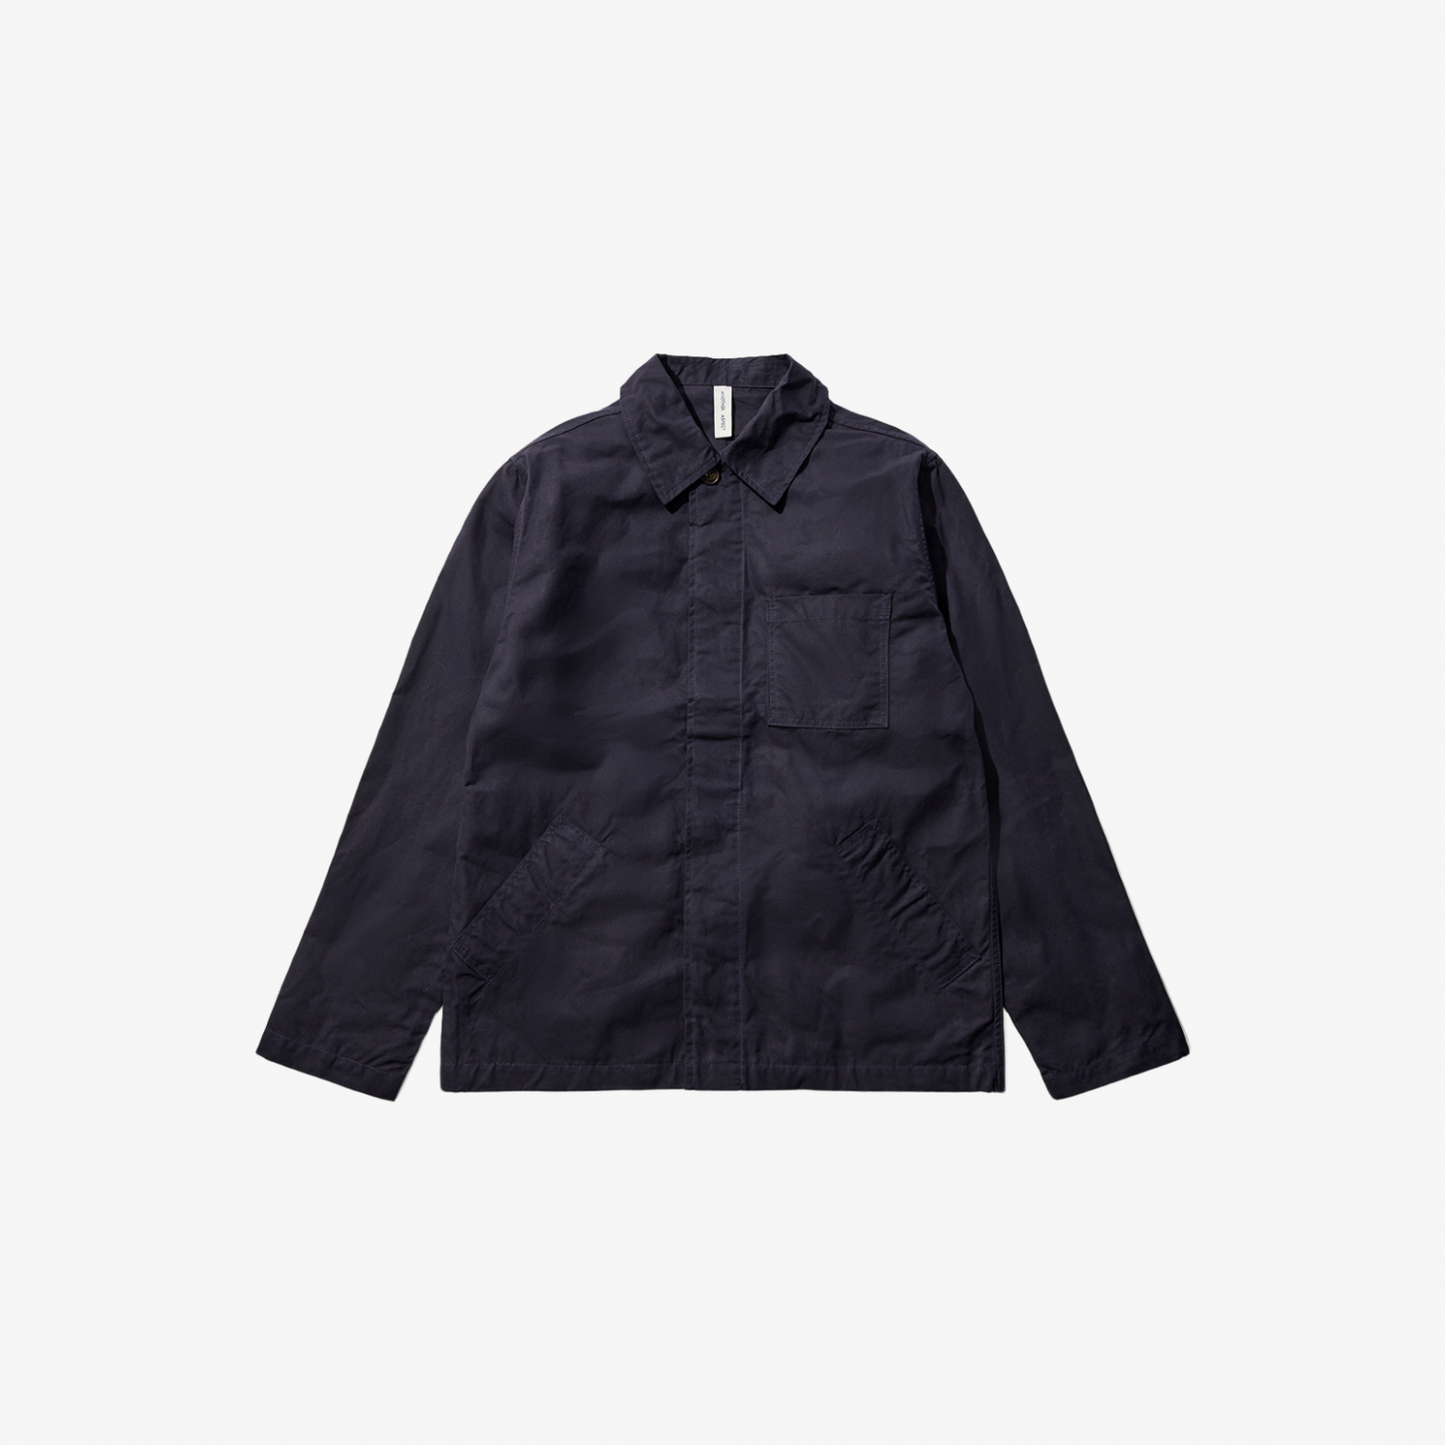 Another Aspect Another Overshirt 2.0